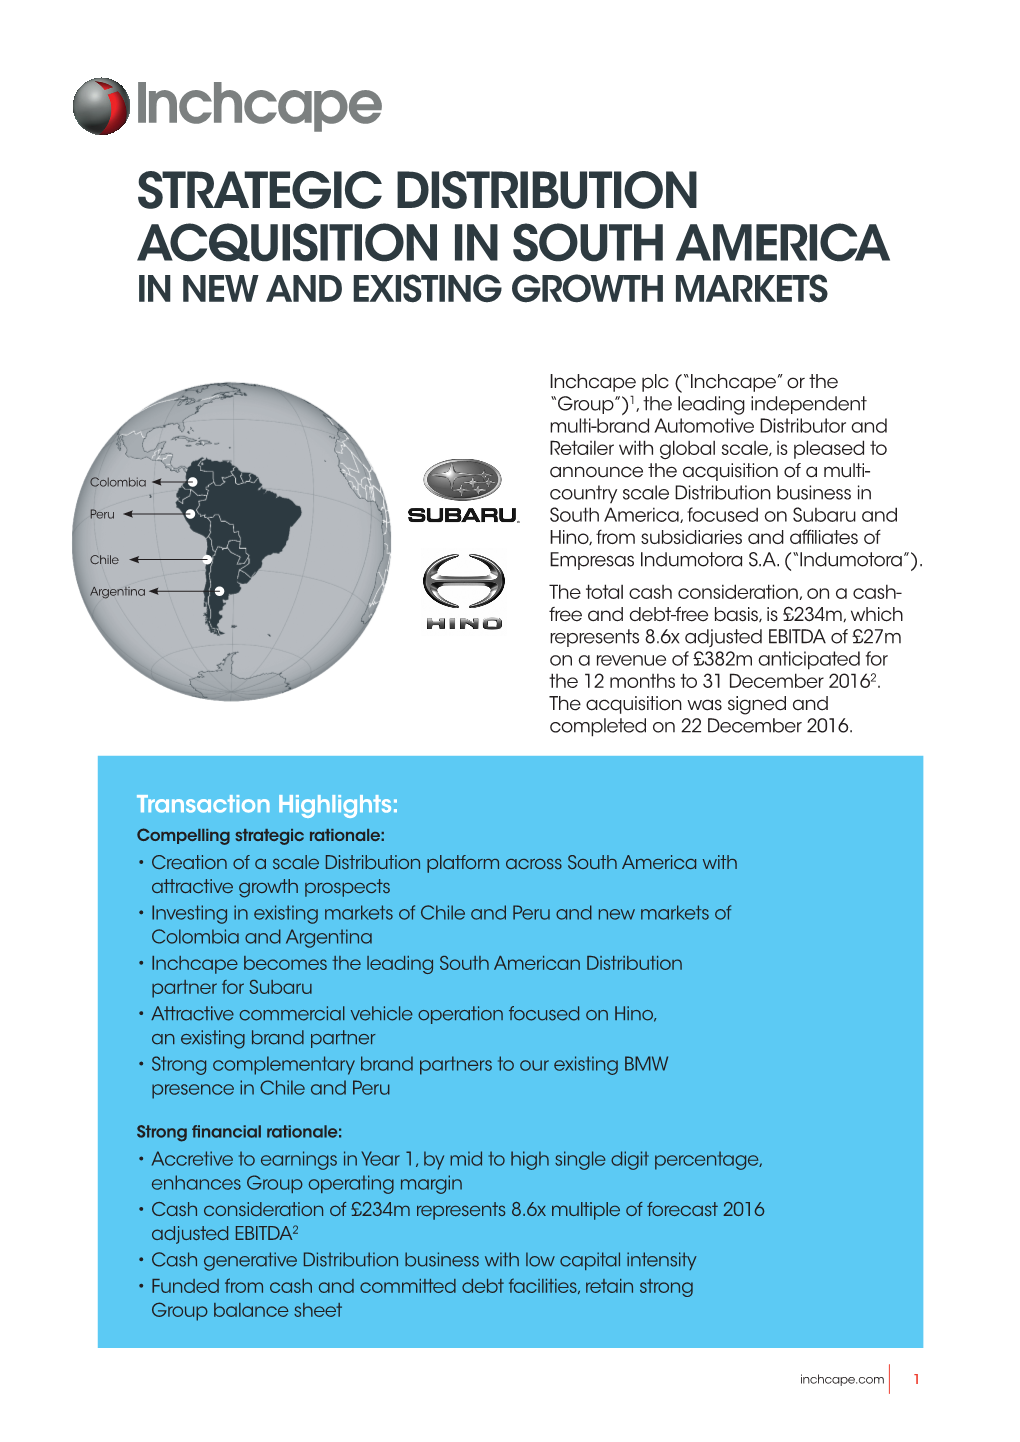 Strategic Distribution Acquisition in South America in New and Existing Growth Markets